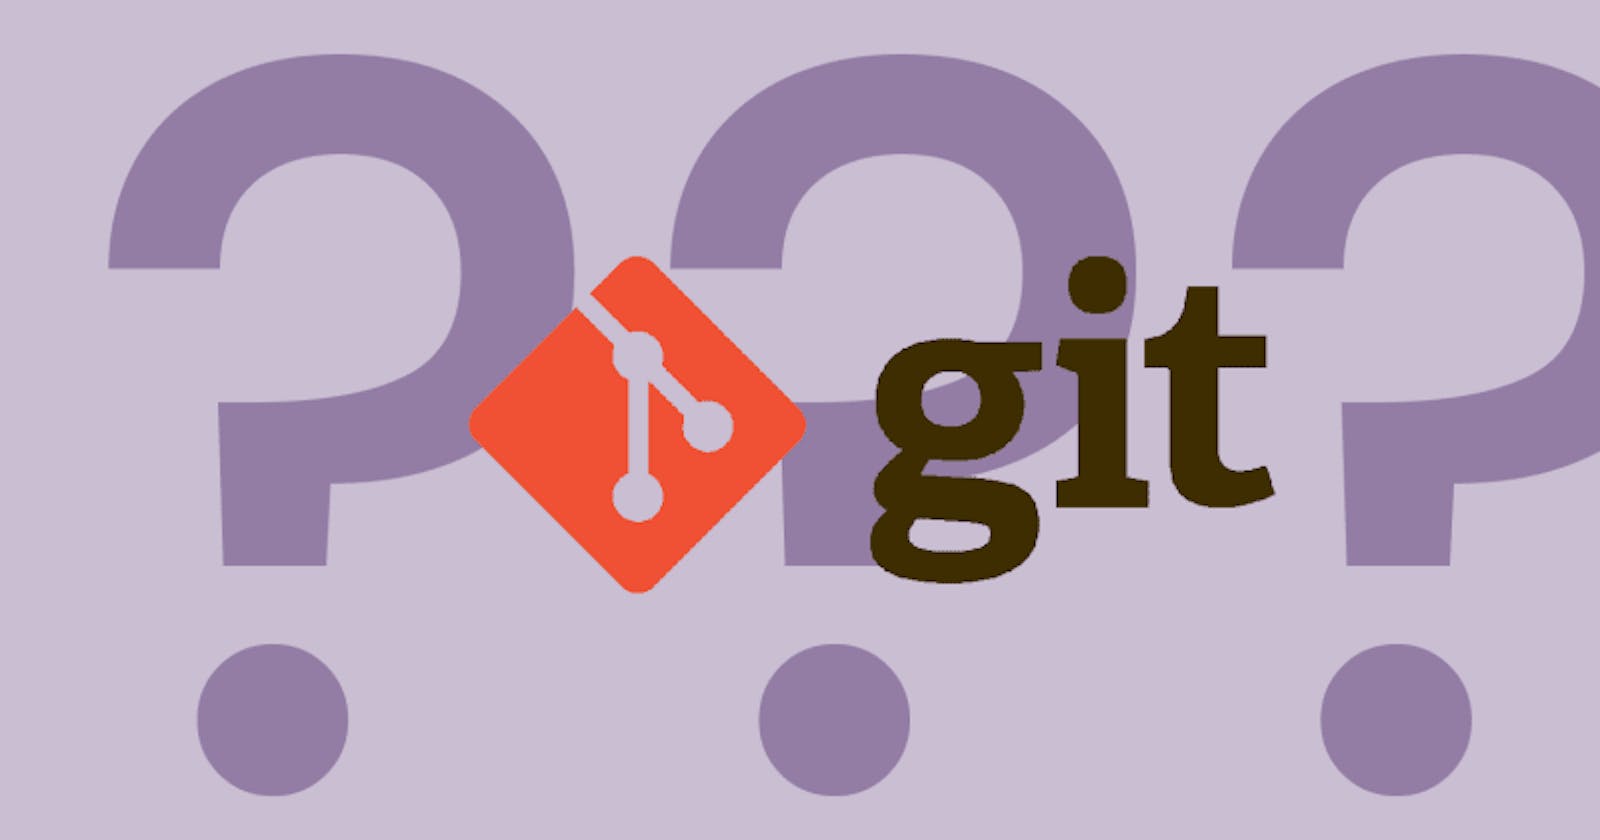 An explanation of Git for beginners